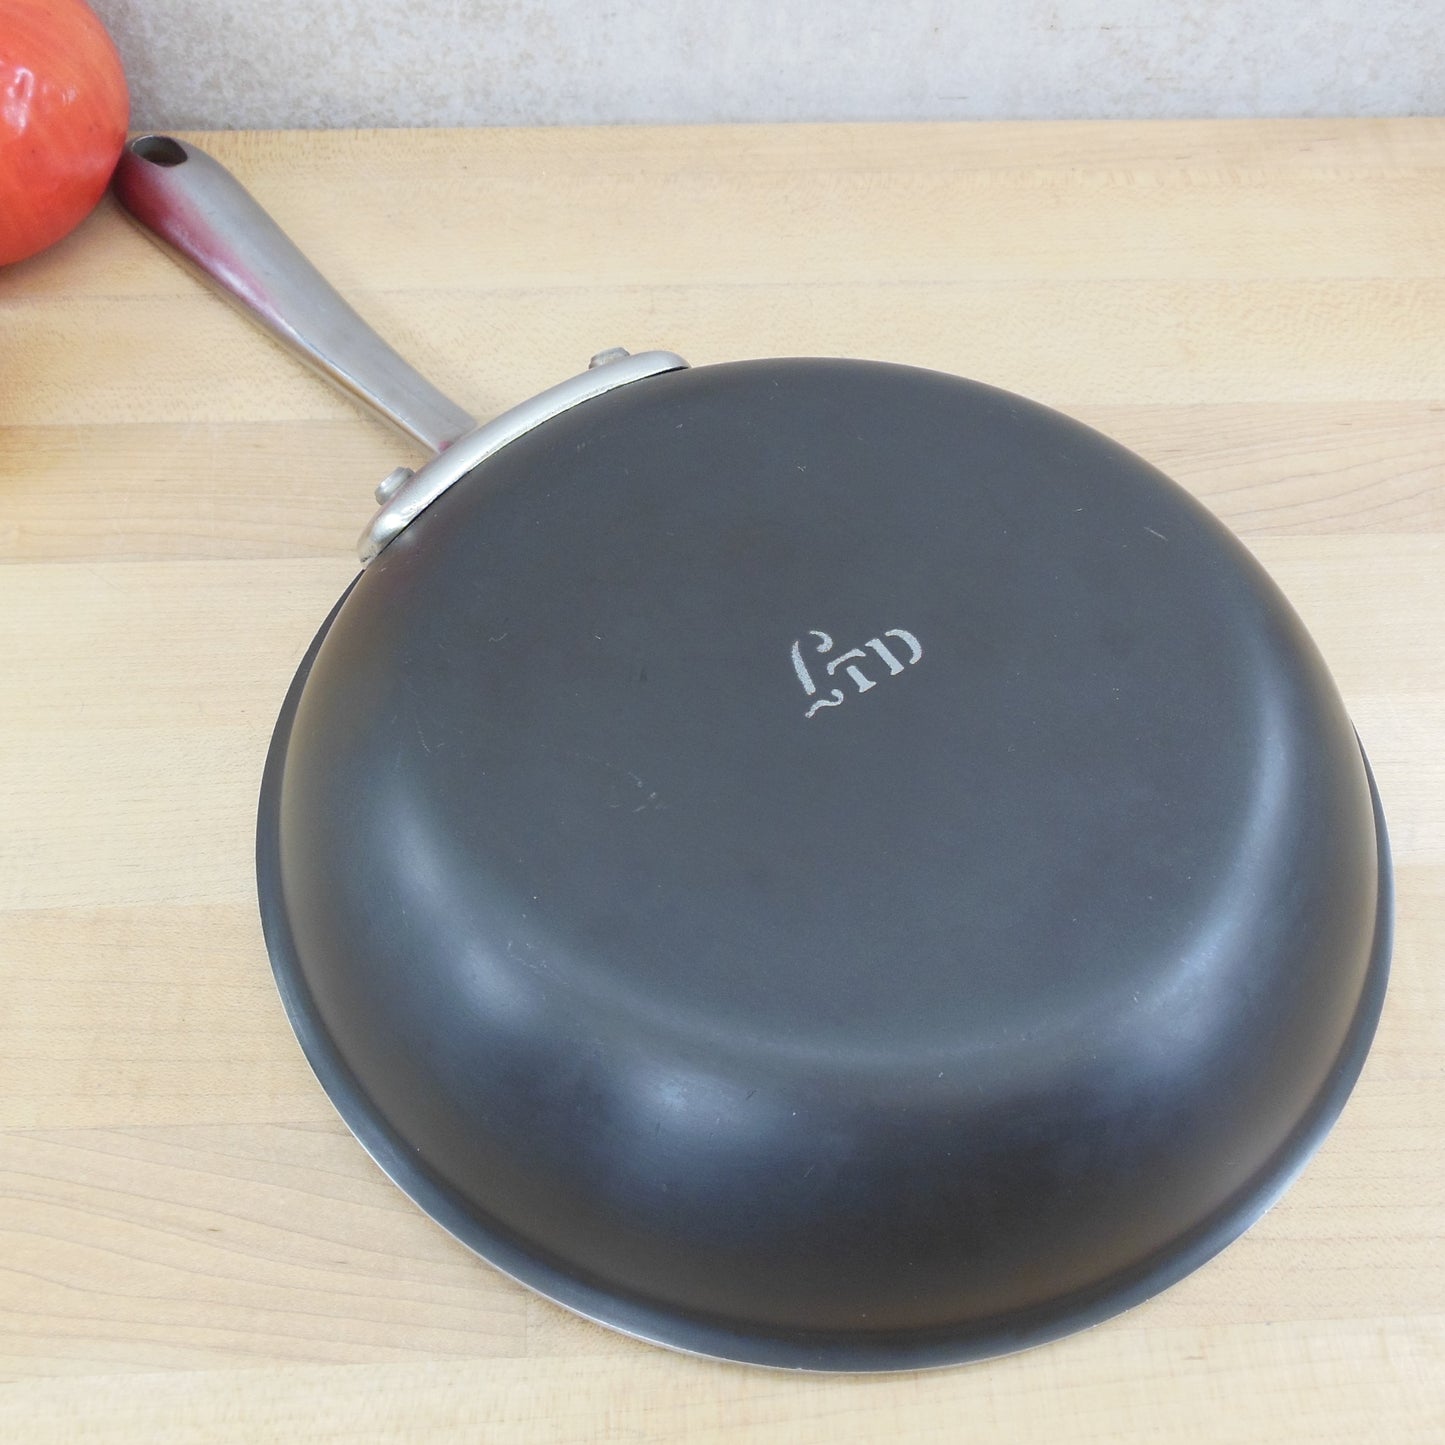 All-Clad Ltd Stainless Anodized 8.5" Fry Pan Skillet vintage